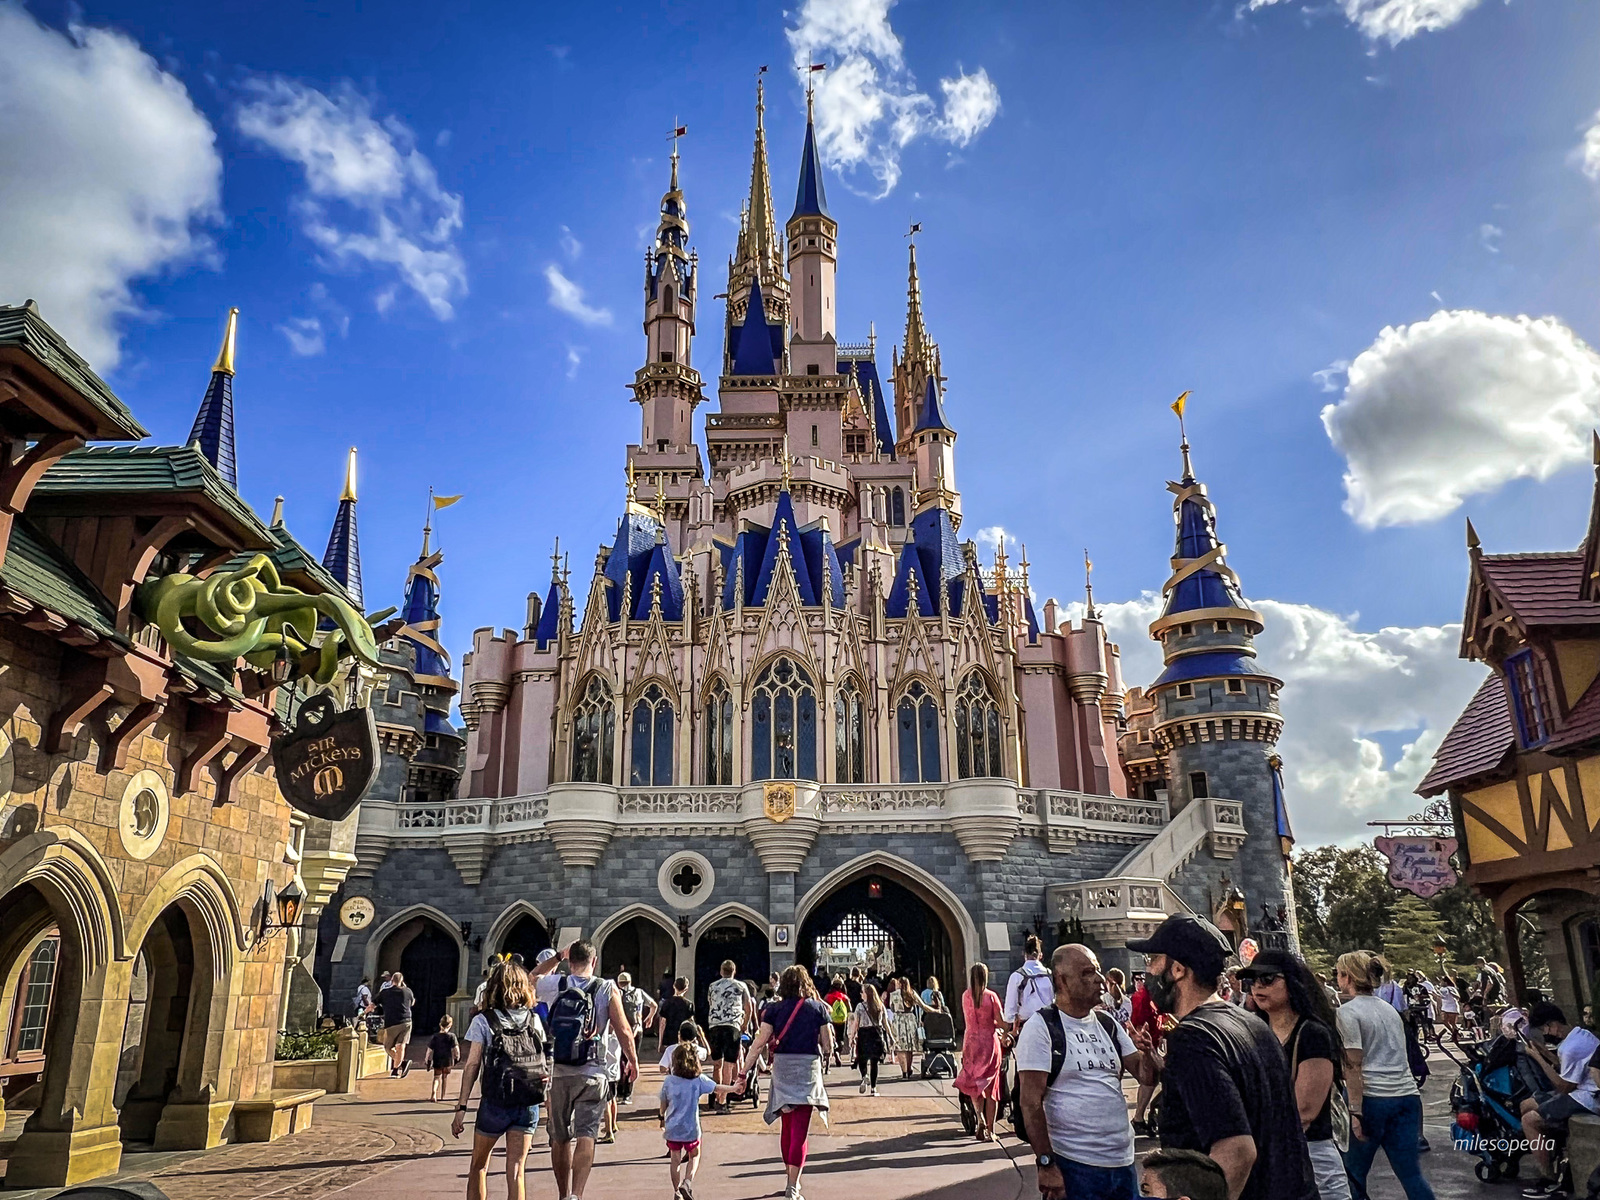 How to Explore the Disney World Resort in Orlando for Free